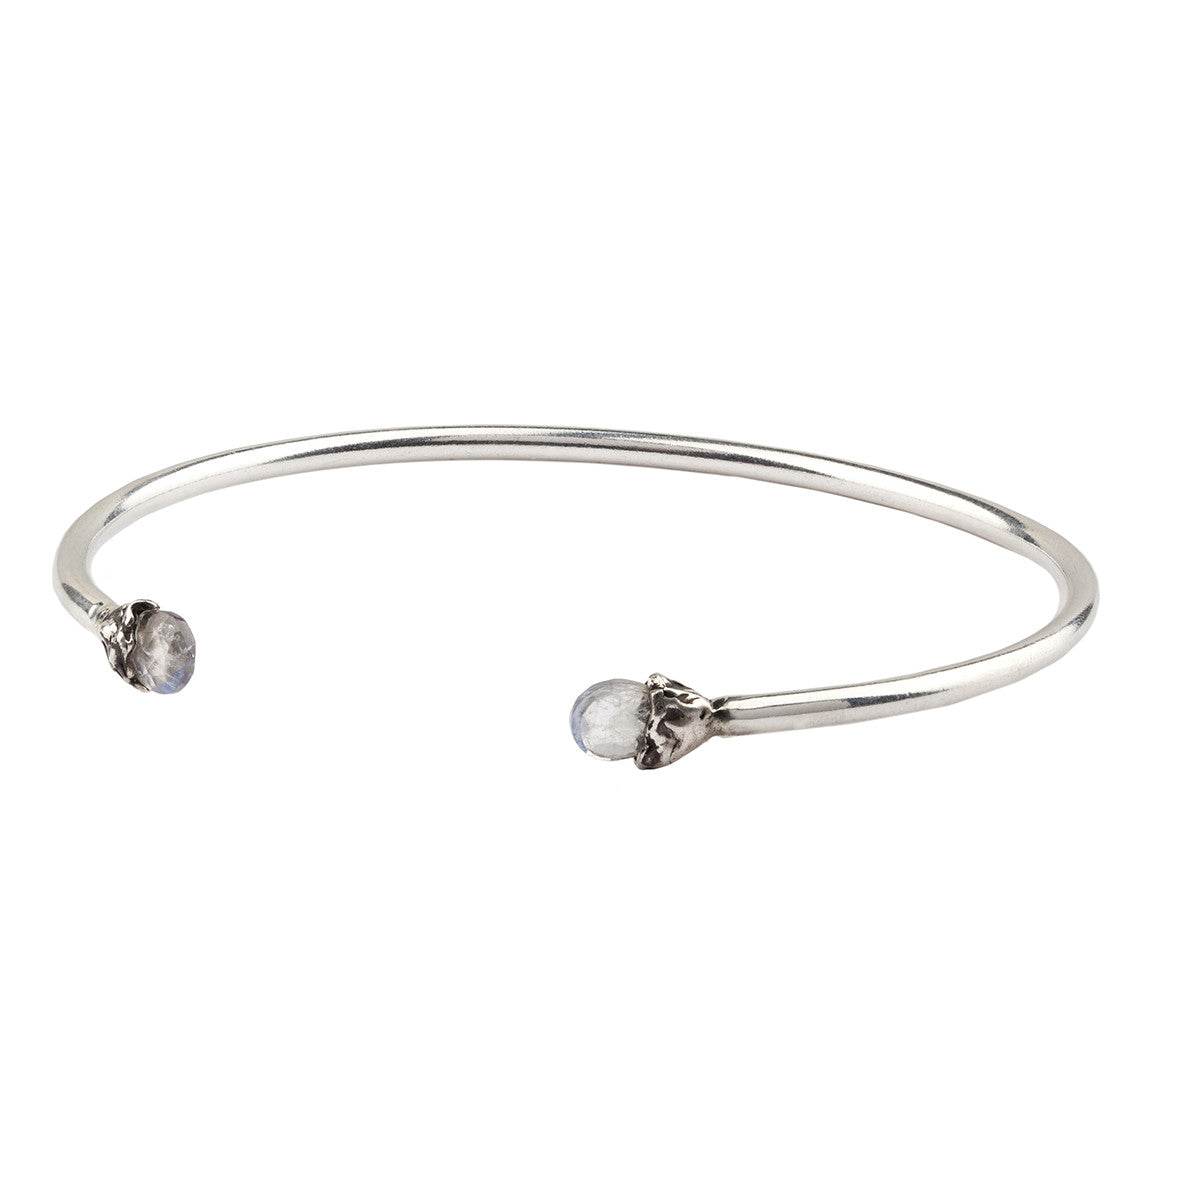 An open silver bangle capped with semi precious stones promoting improvement